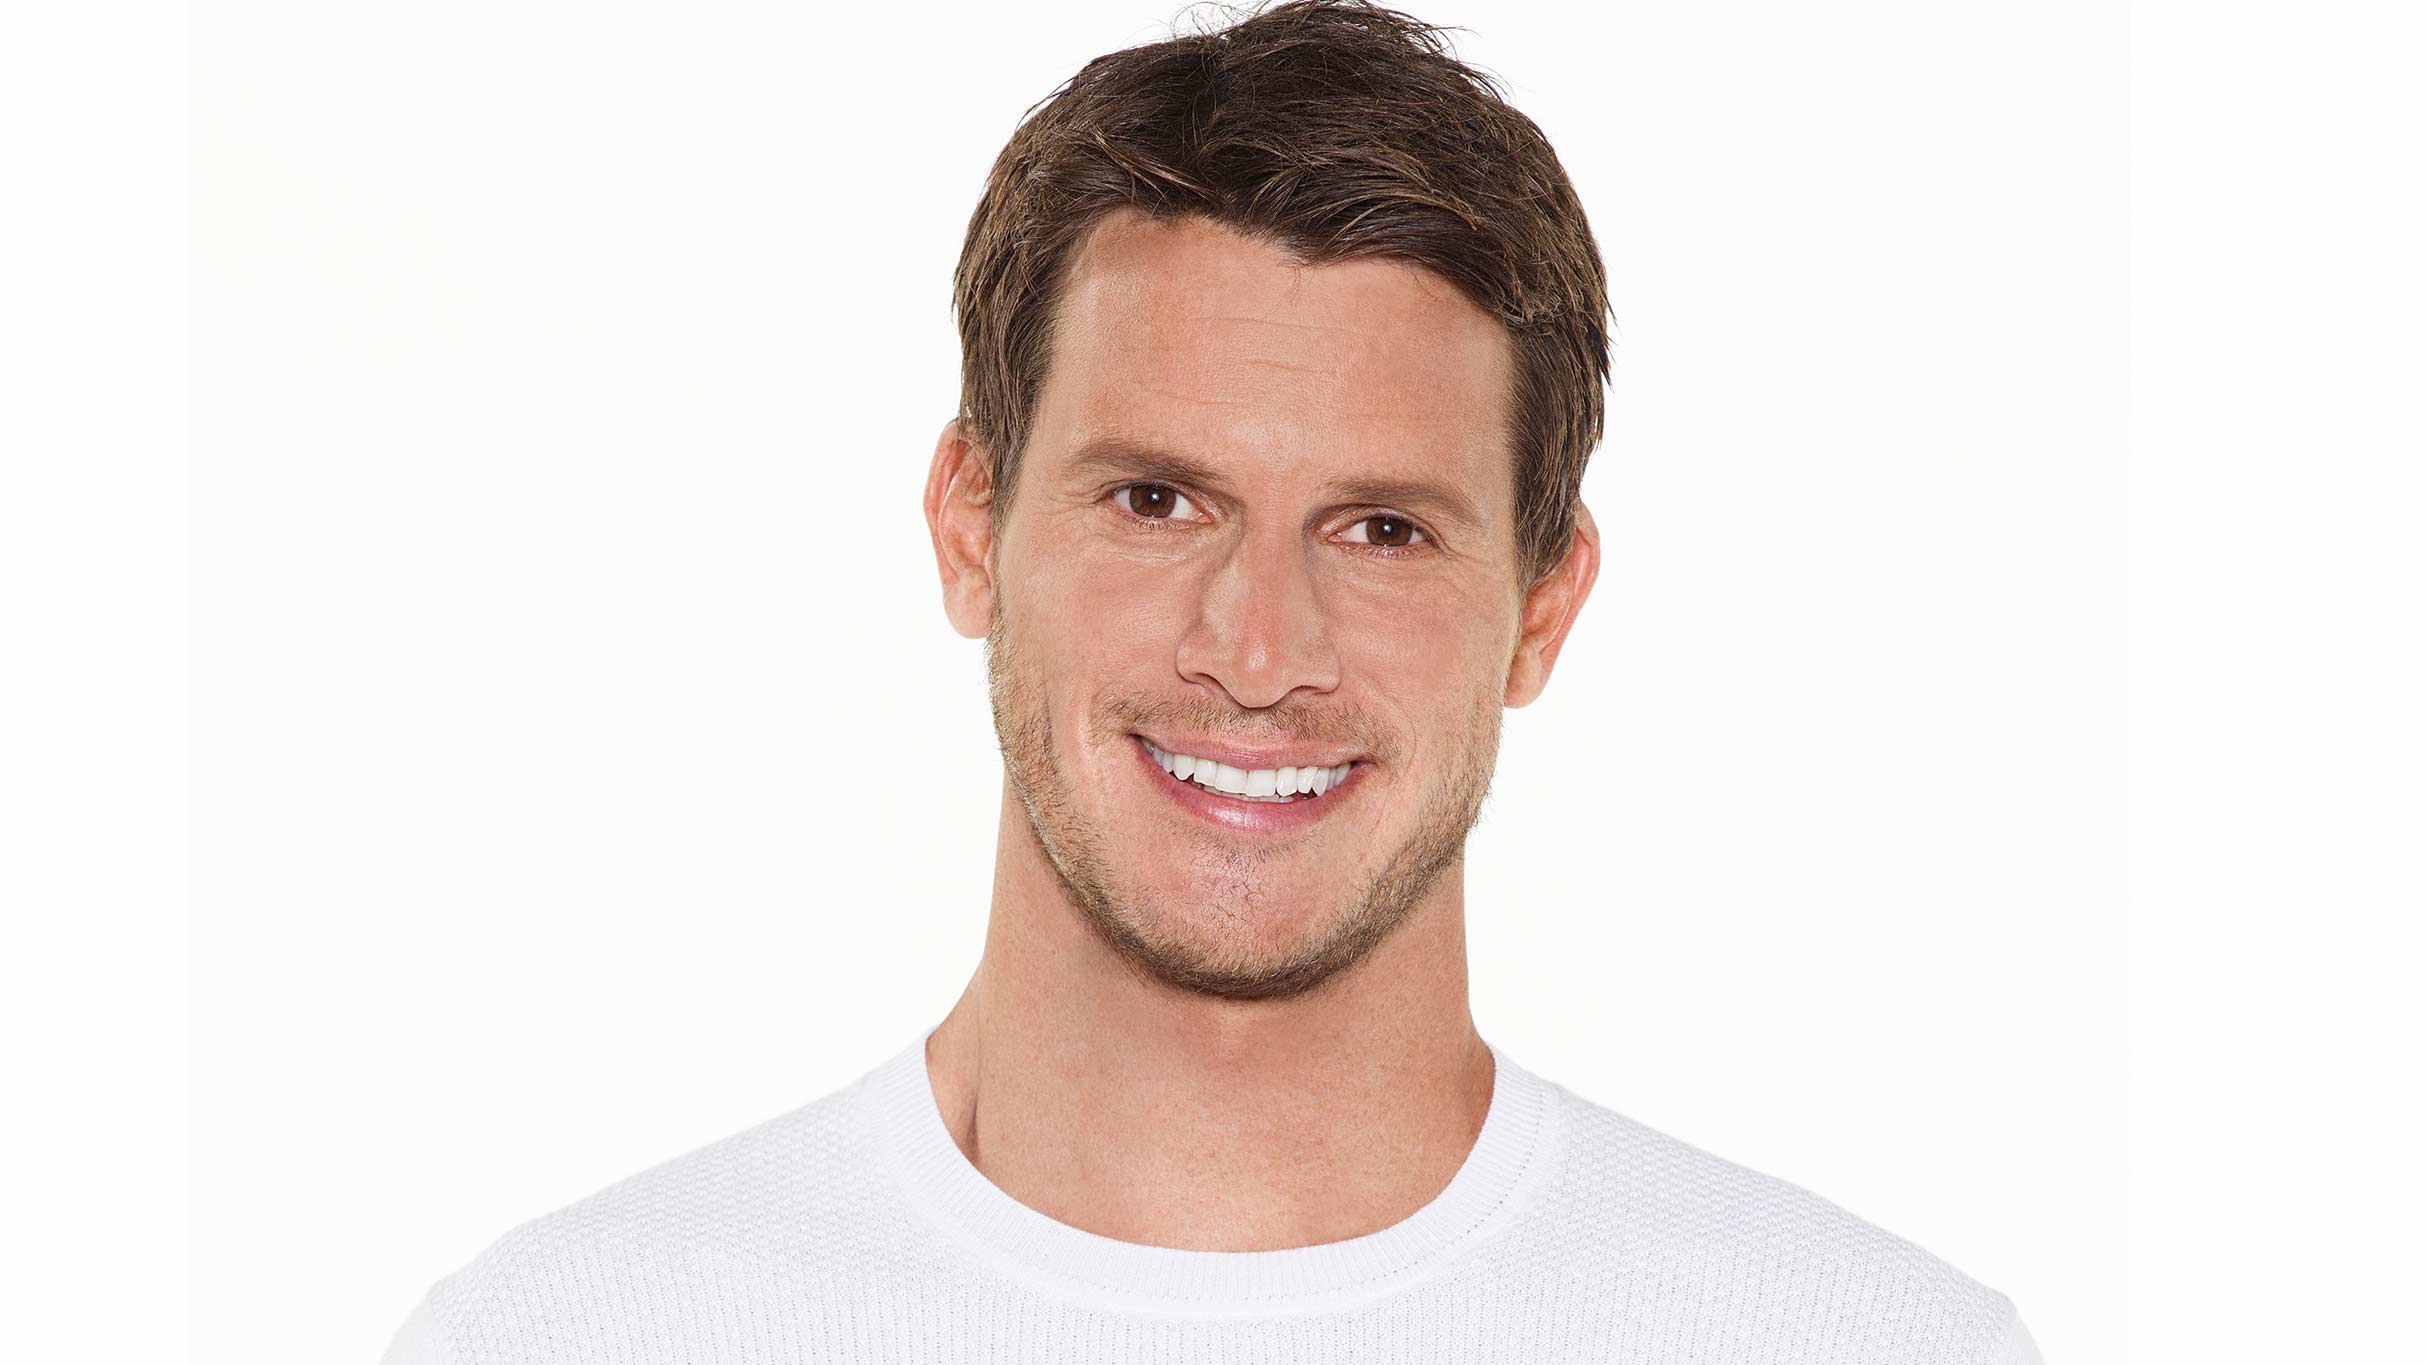 Daniel Tosh to perform at State Farm Center The Daily Illini